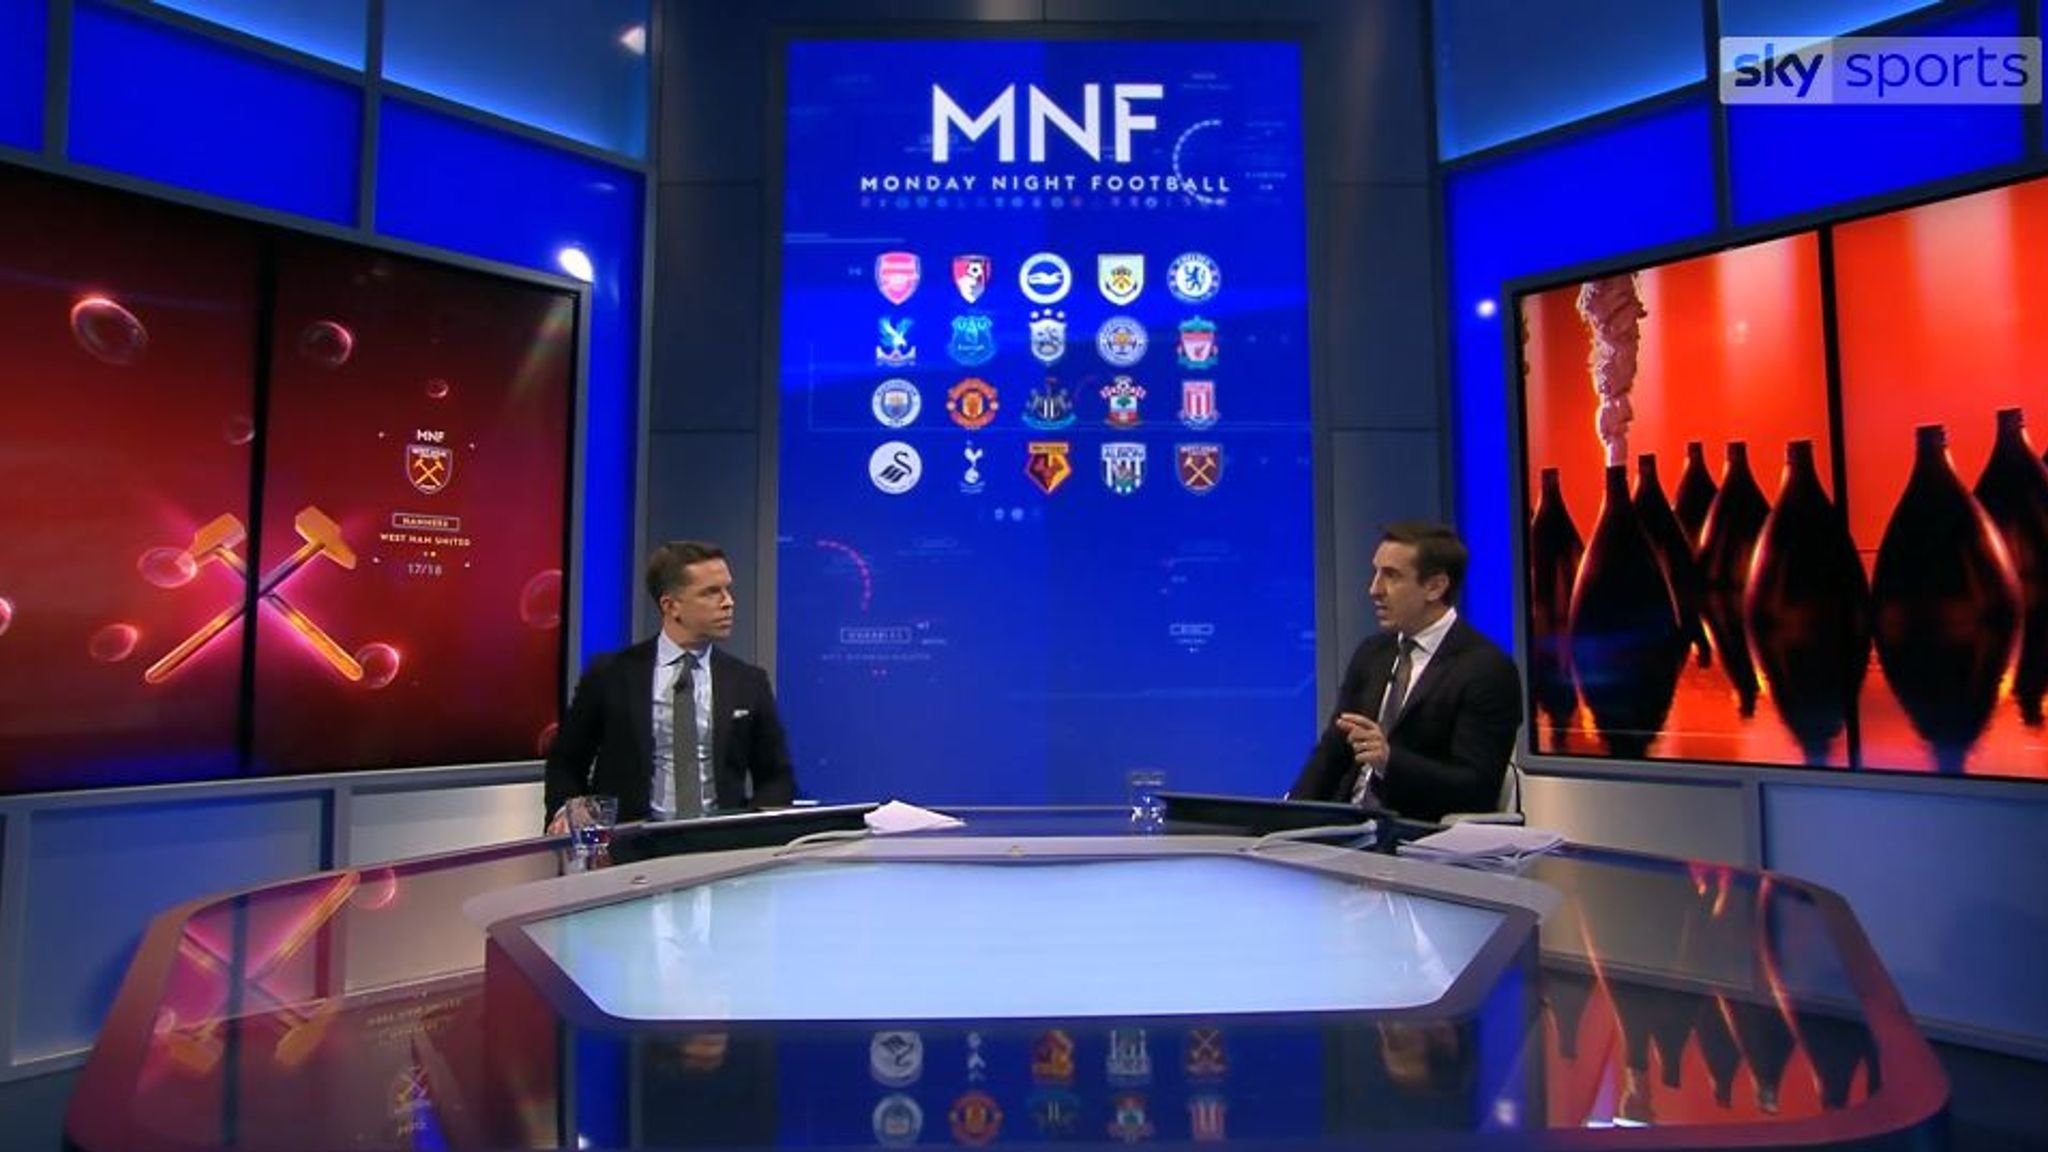 MNF review: Monday Night Football with Gary Neville, Football News